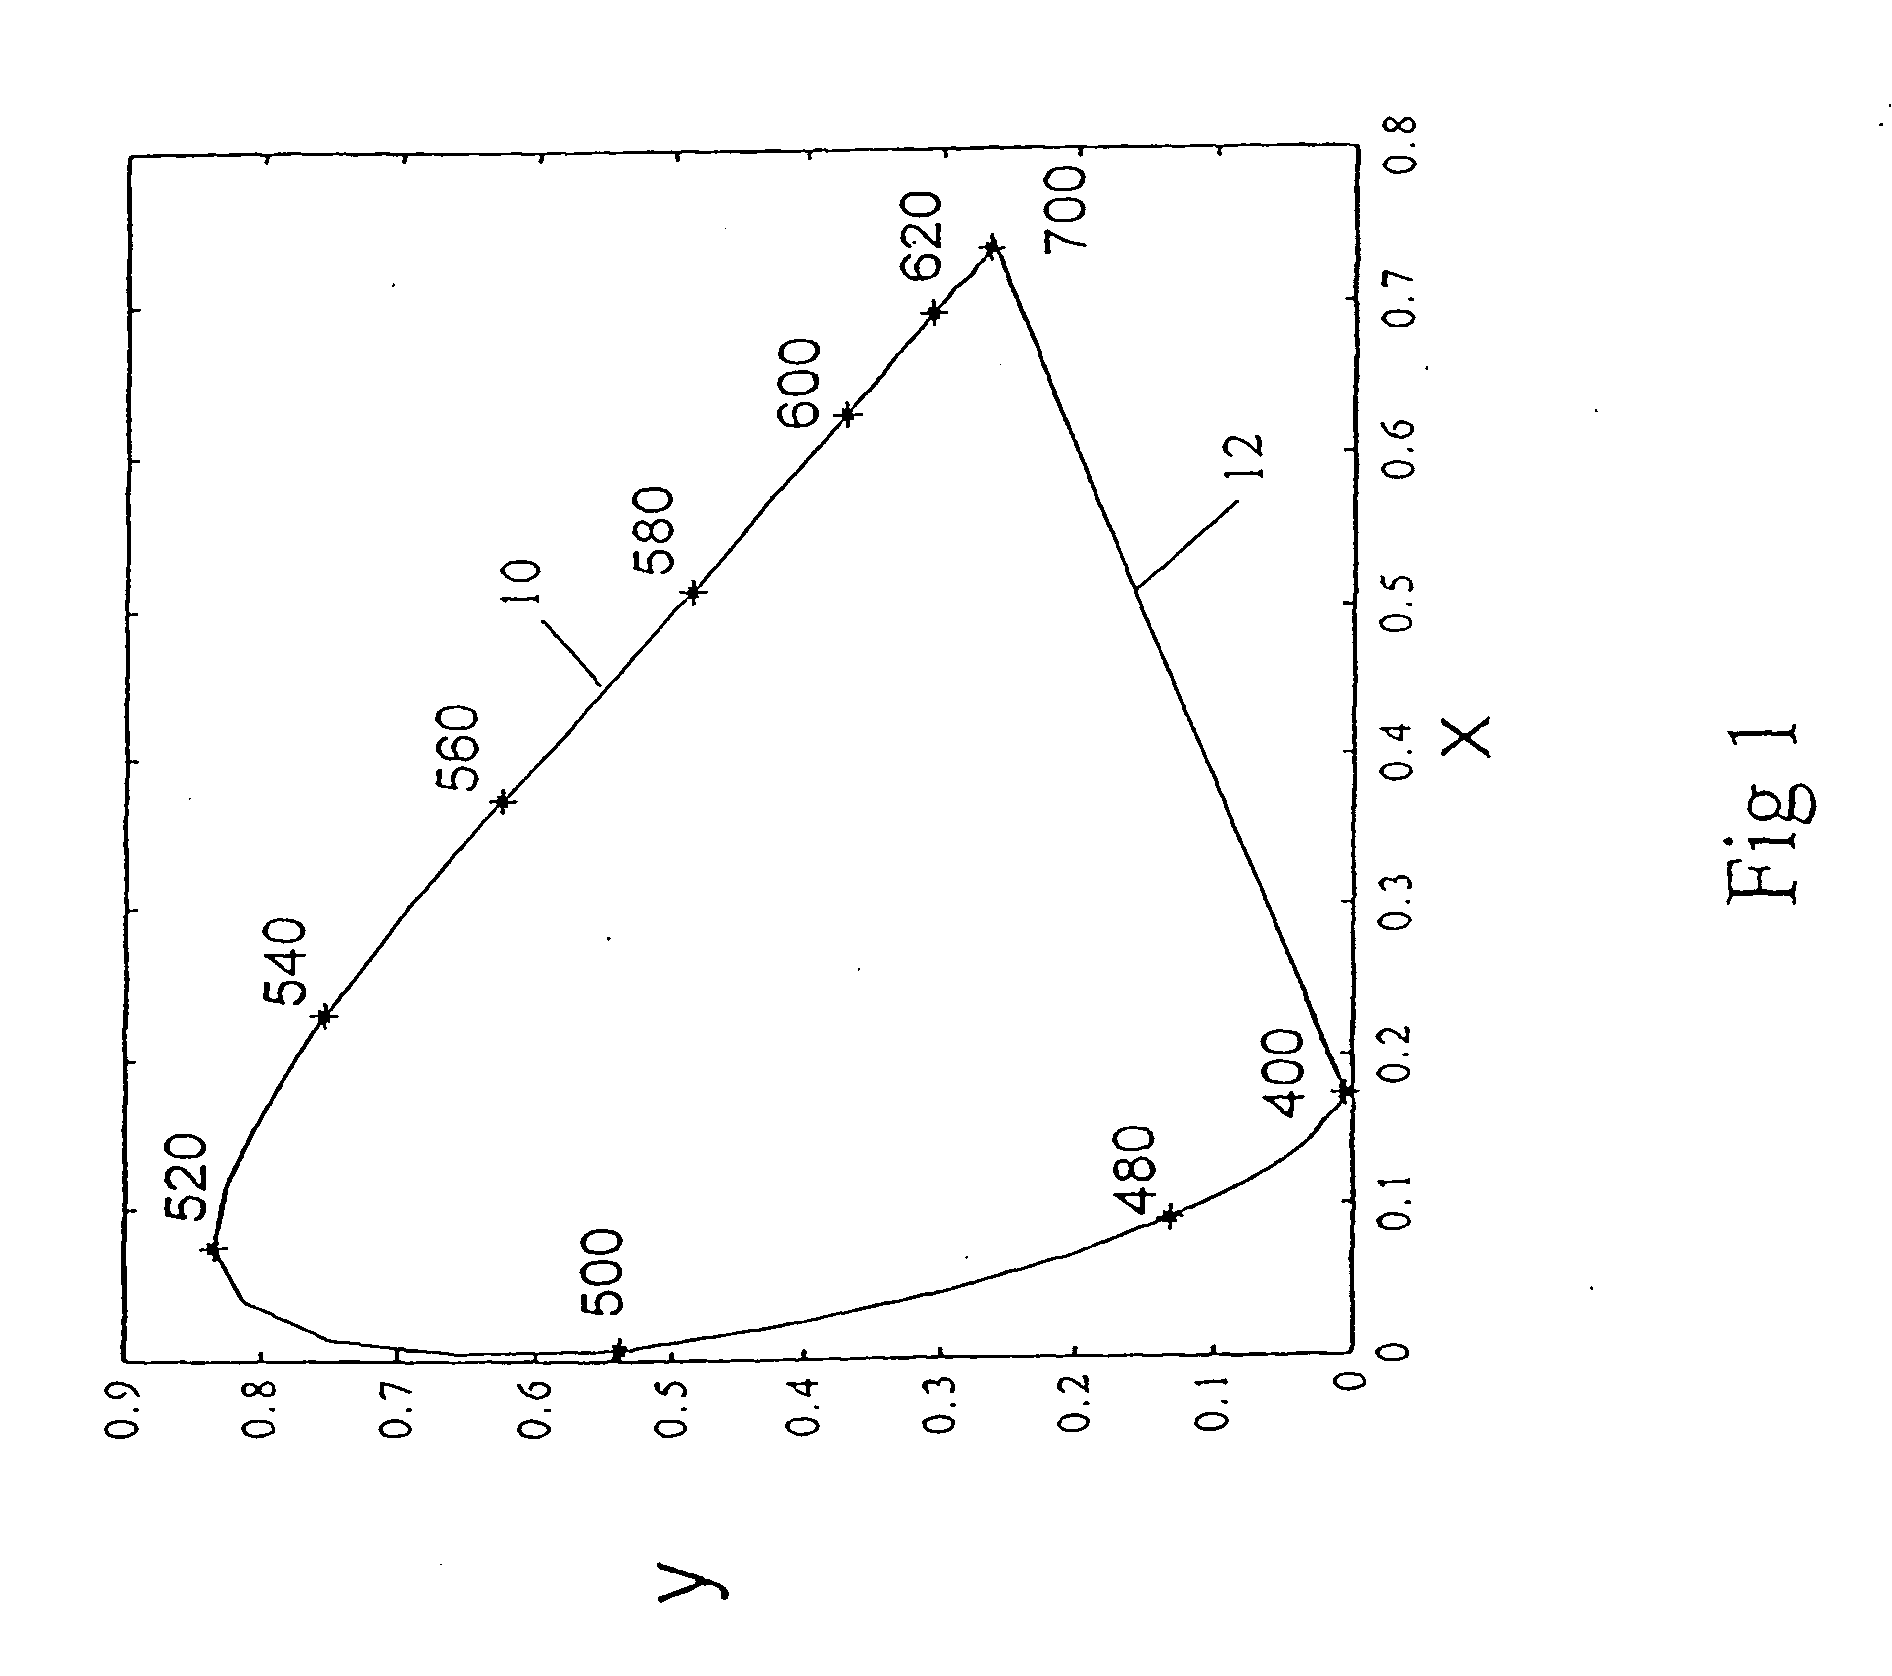 Device, system and method for electronic true color display